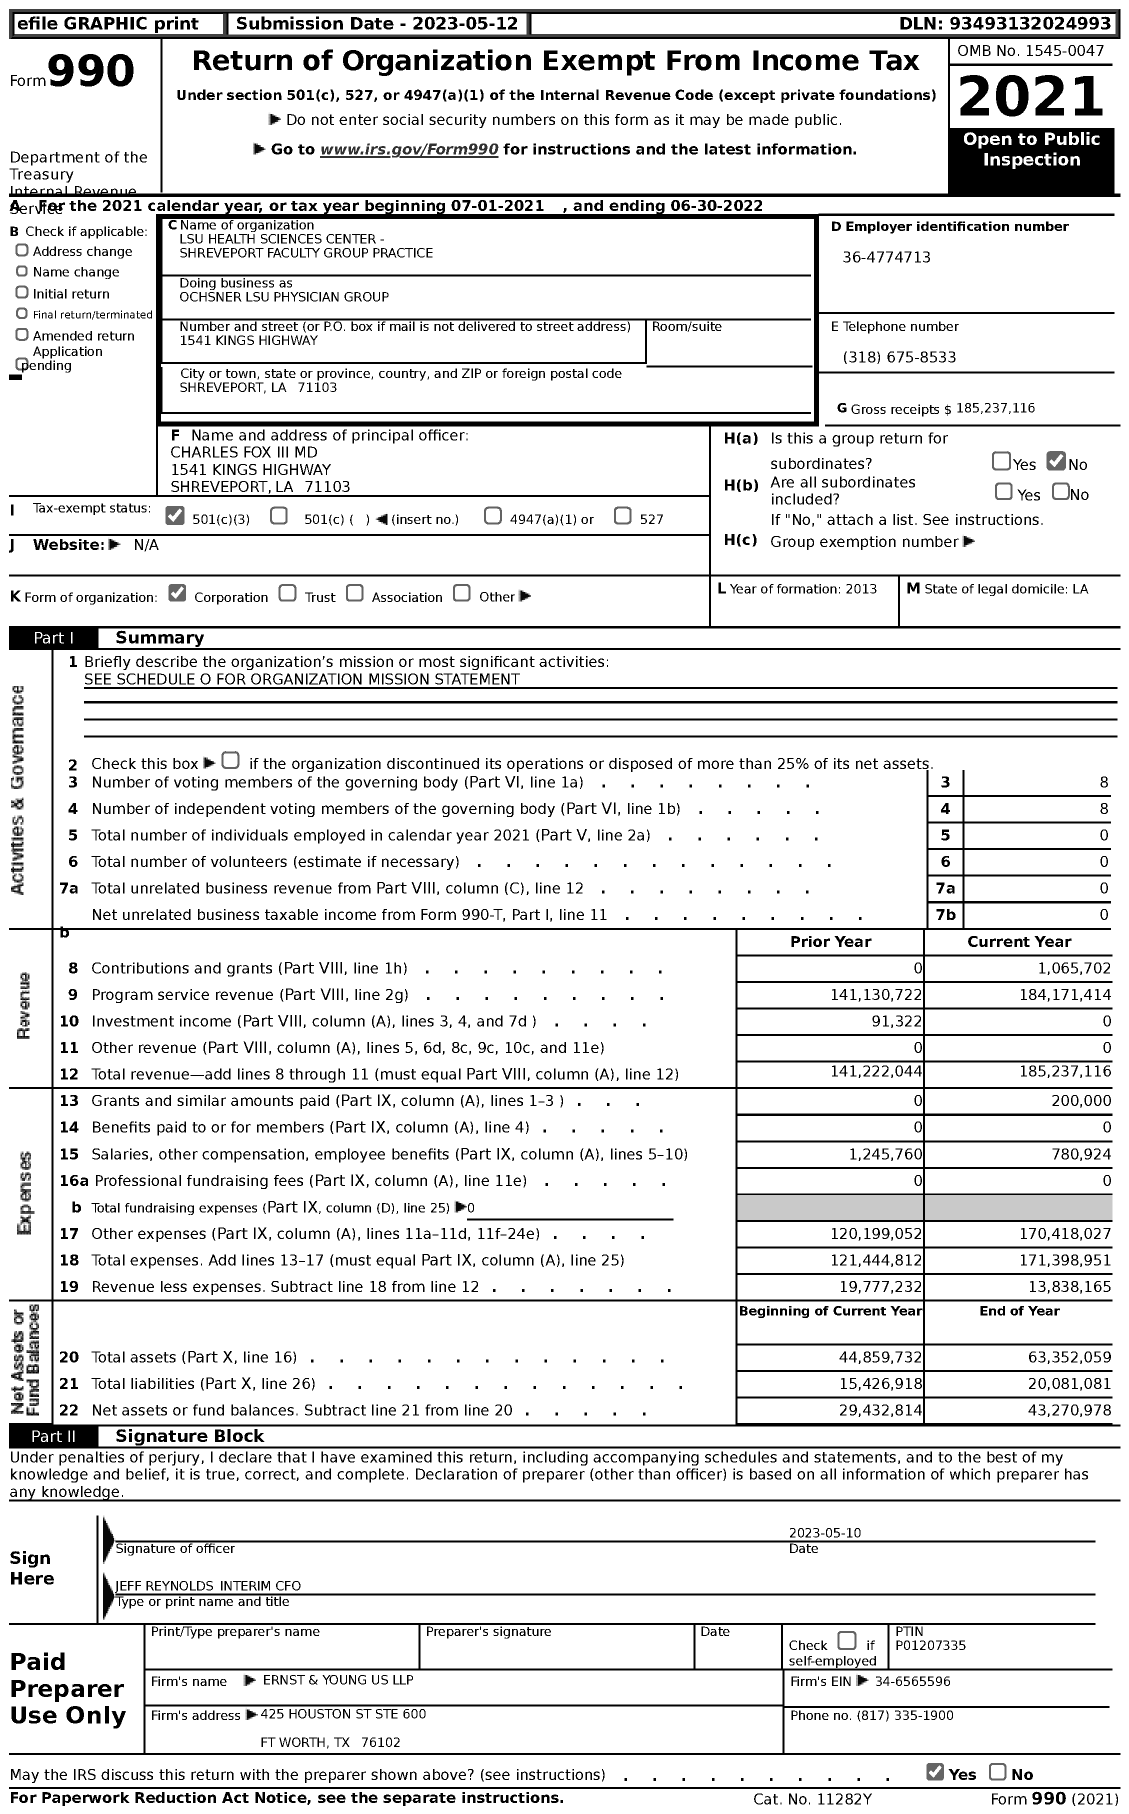 Image of first page of 2021 Form 990 for Ochsner LSU Physician Group